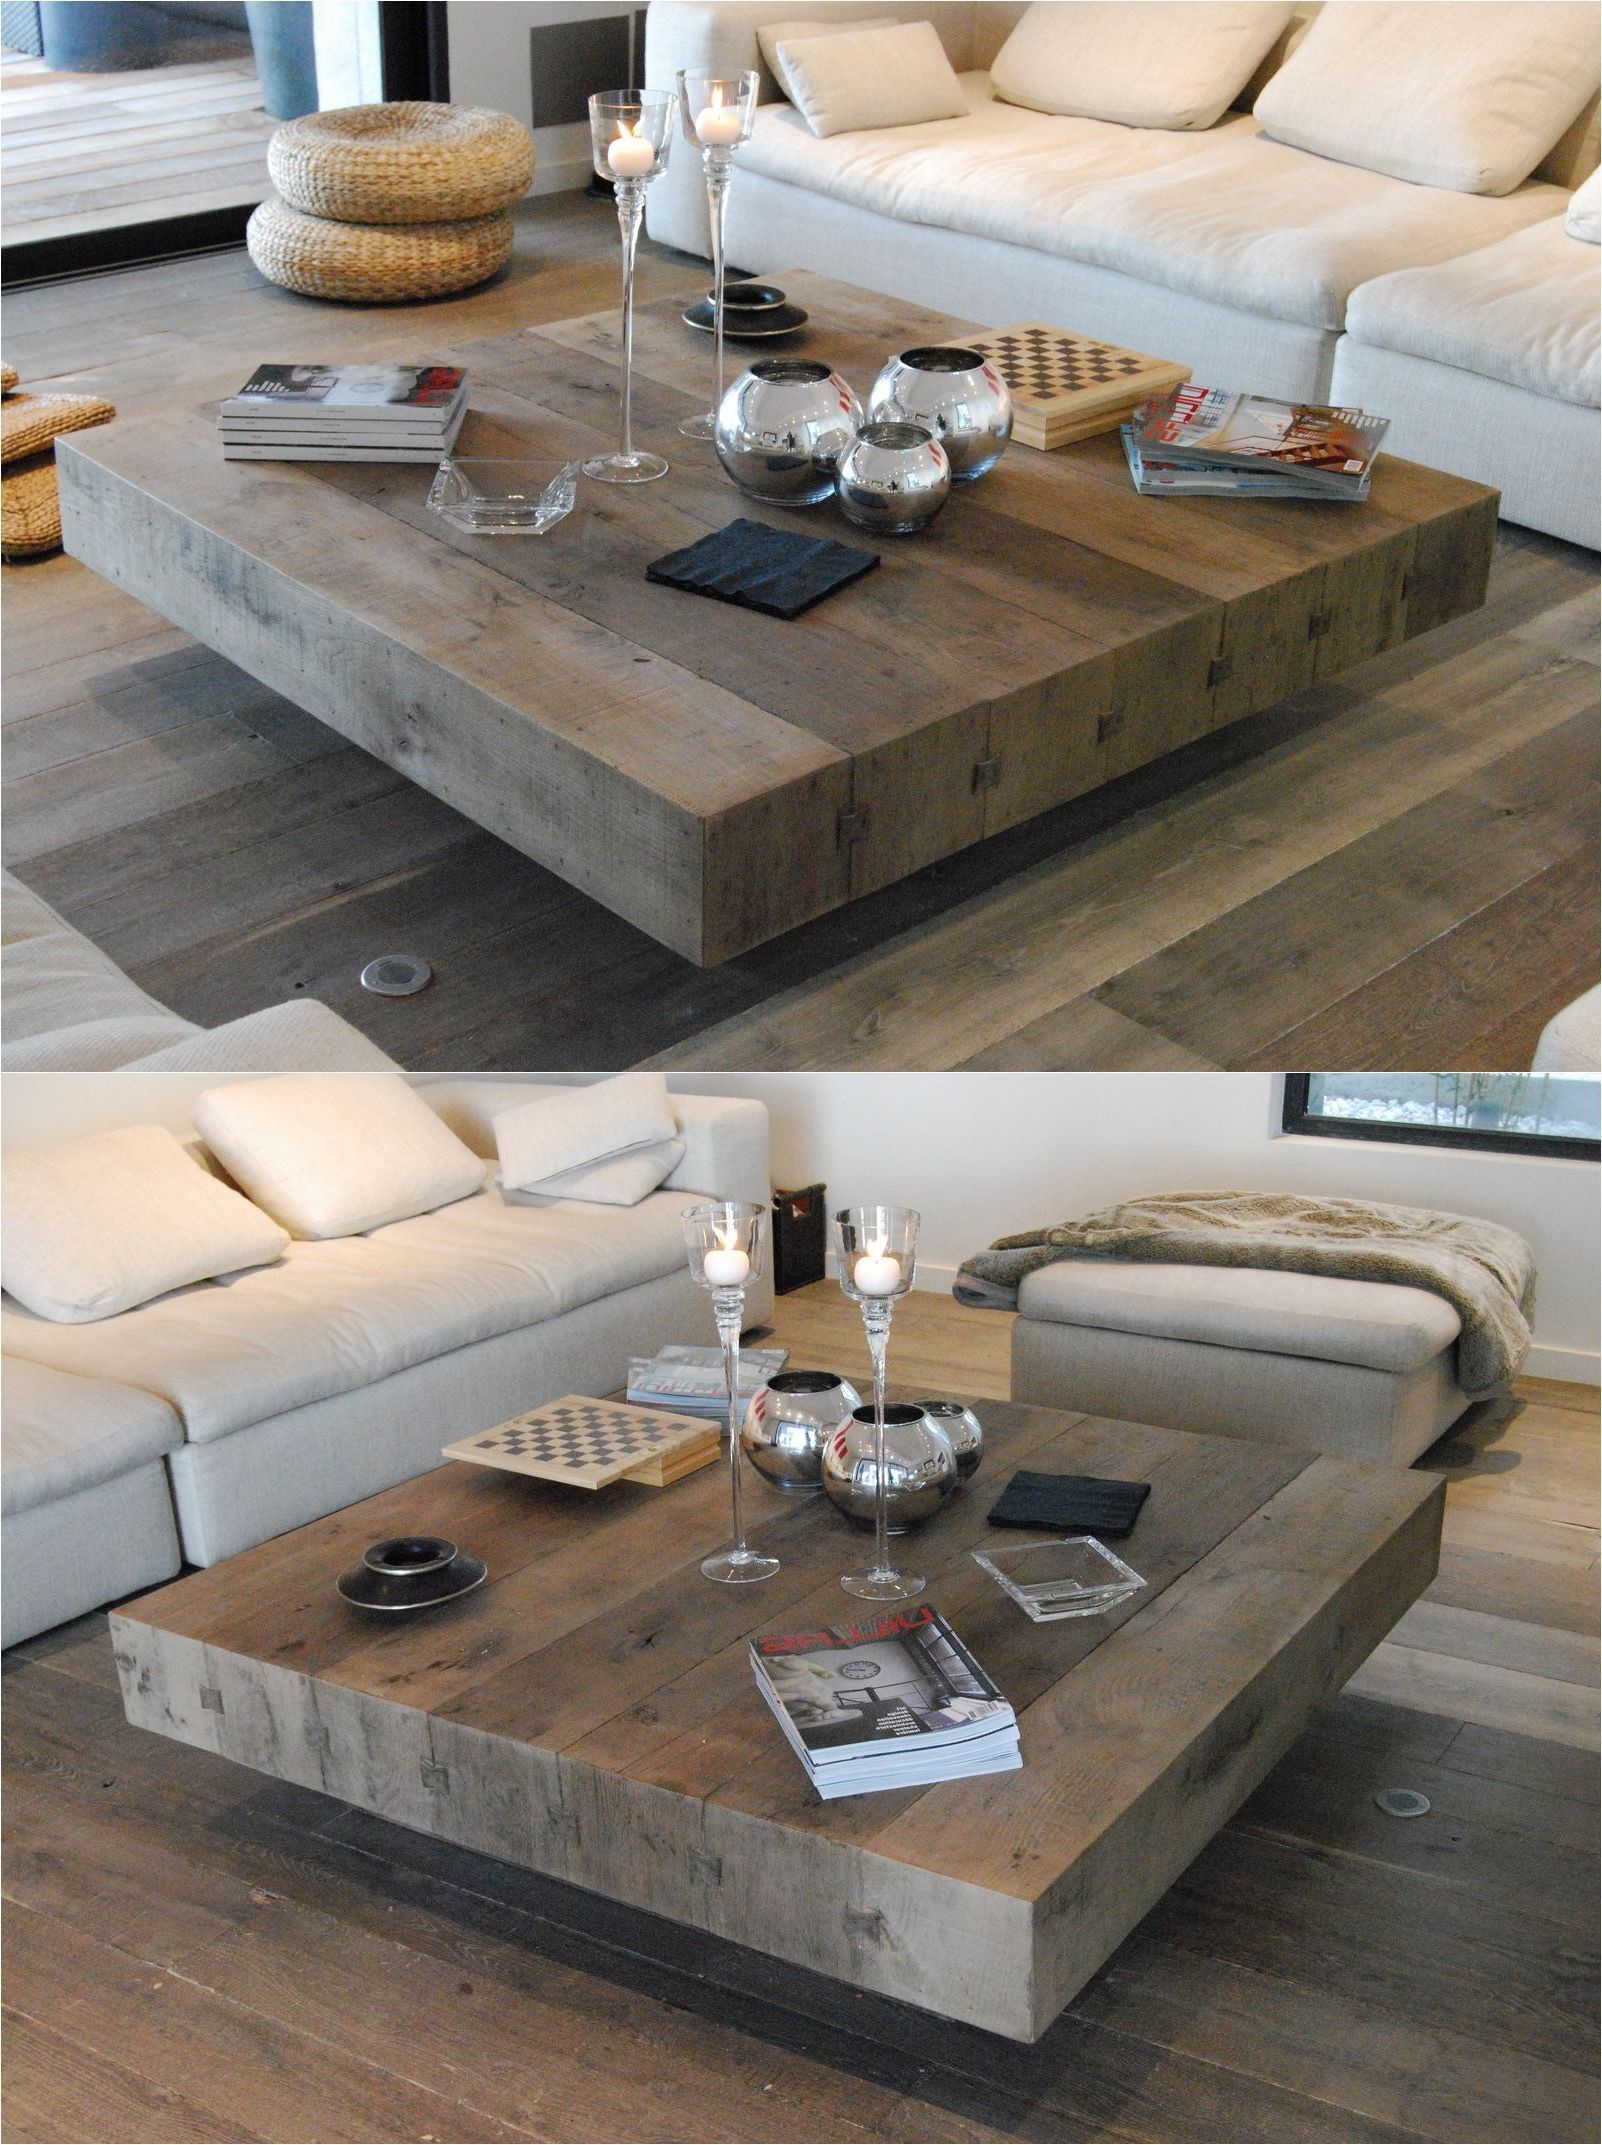 15 Large Square Coffee Tables For Sale Inspiration Pertaining To Current 1 Shelf Square Coffee Tables (Gallery 2 of 20)